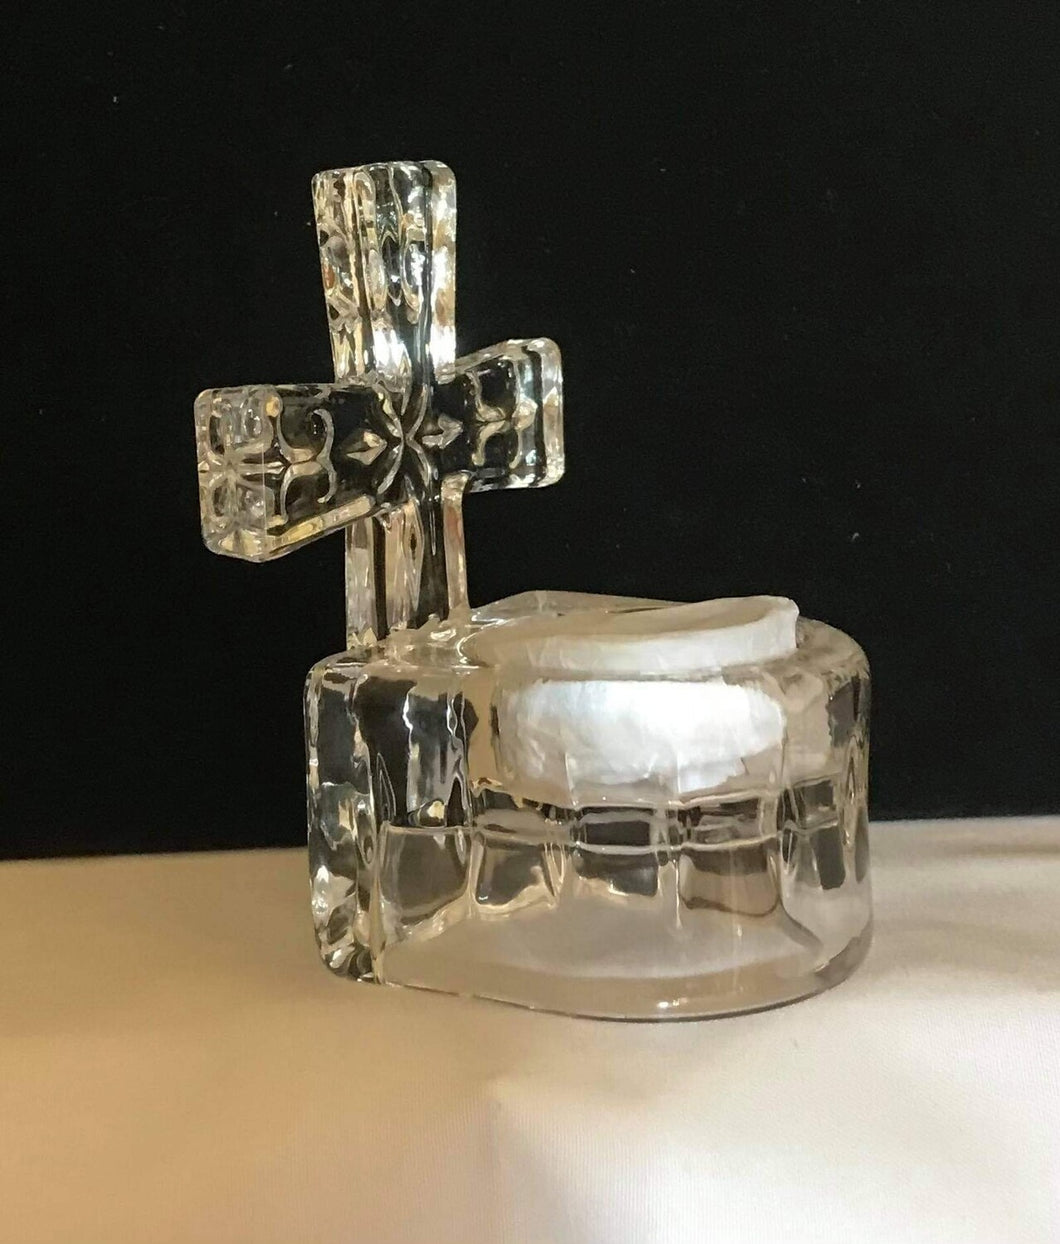 Glass votive candle holder with one tea light